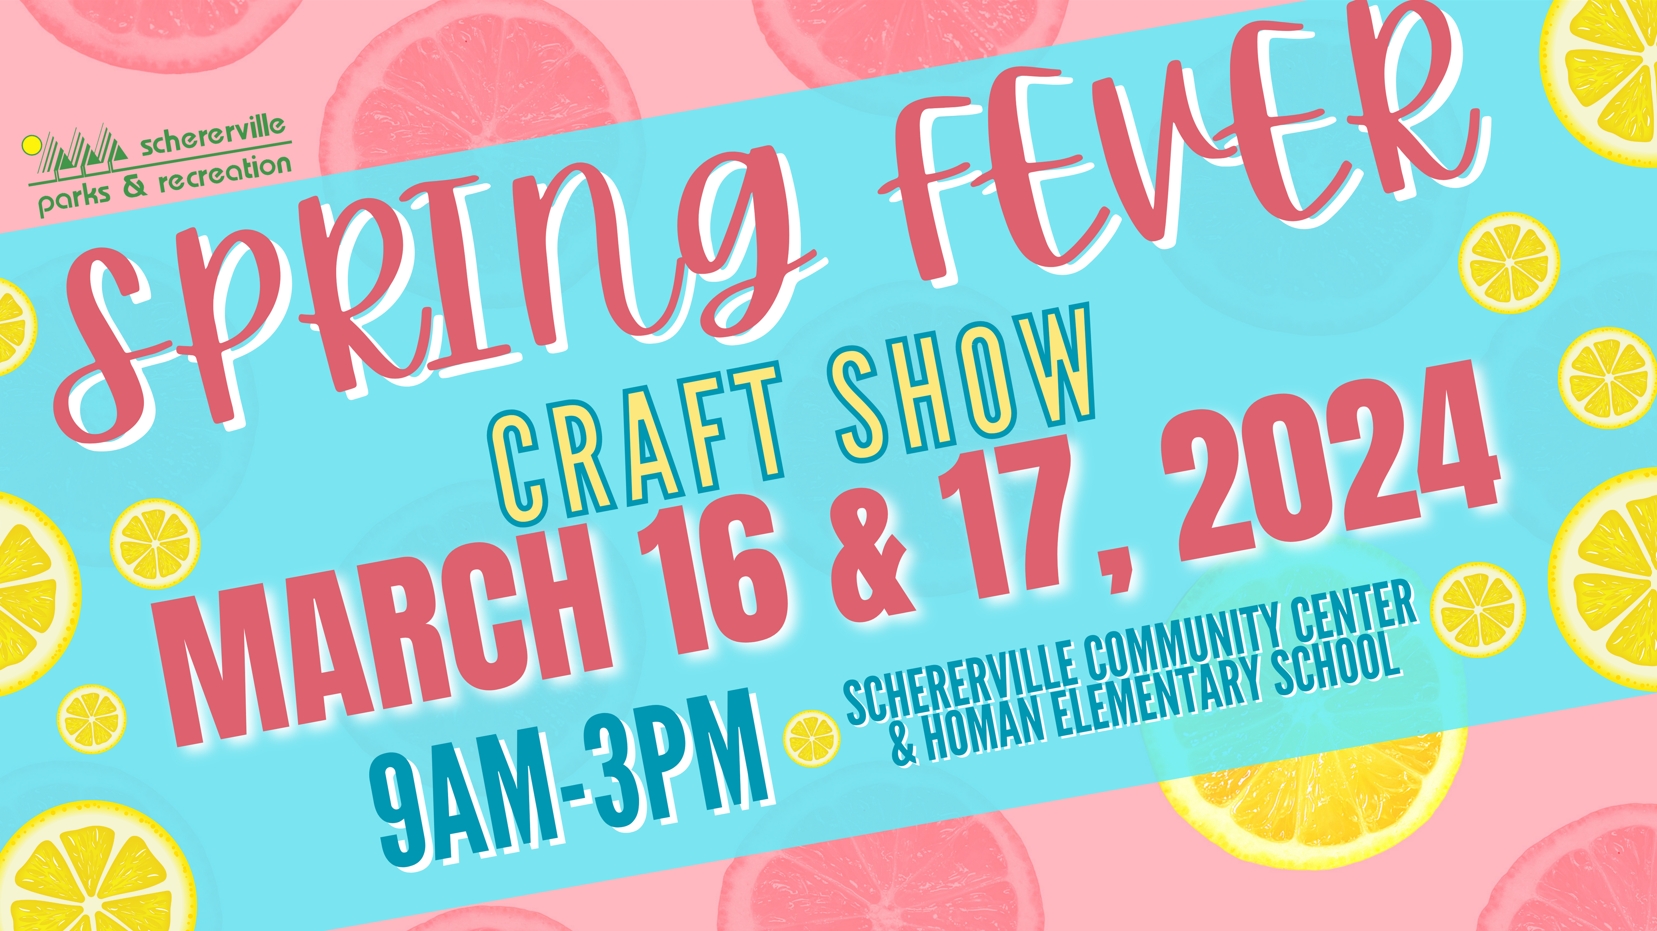 2024 Spring Fever Craft Show - March 16th & March 17th